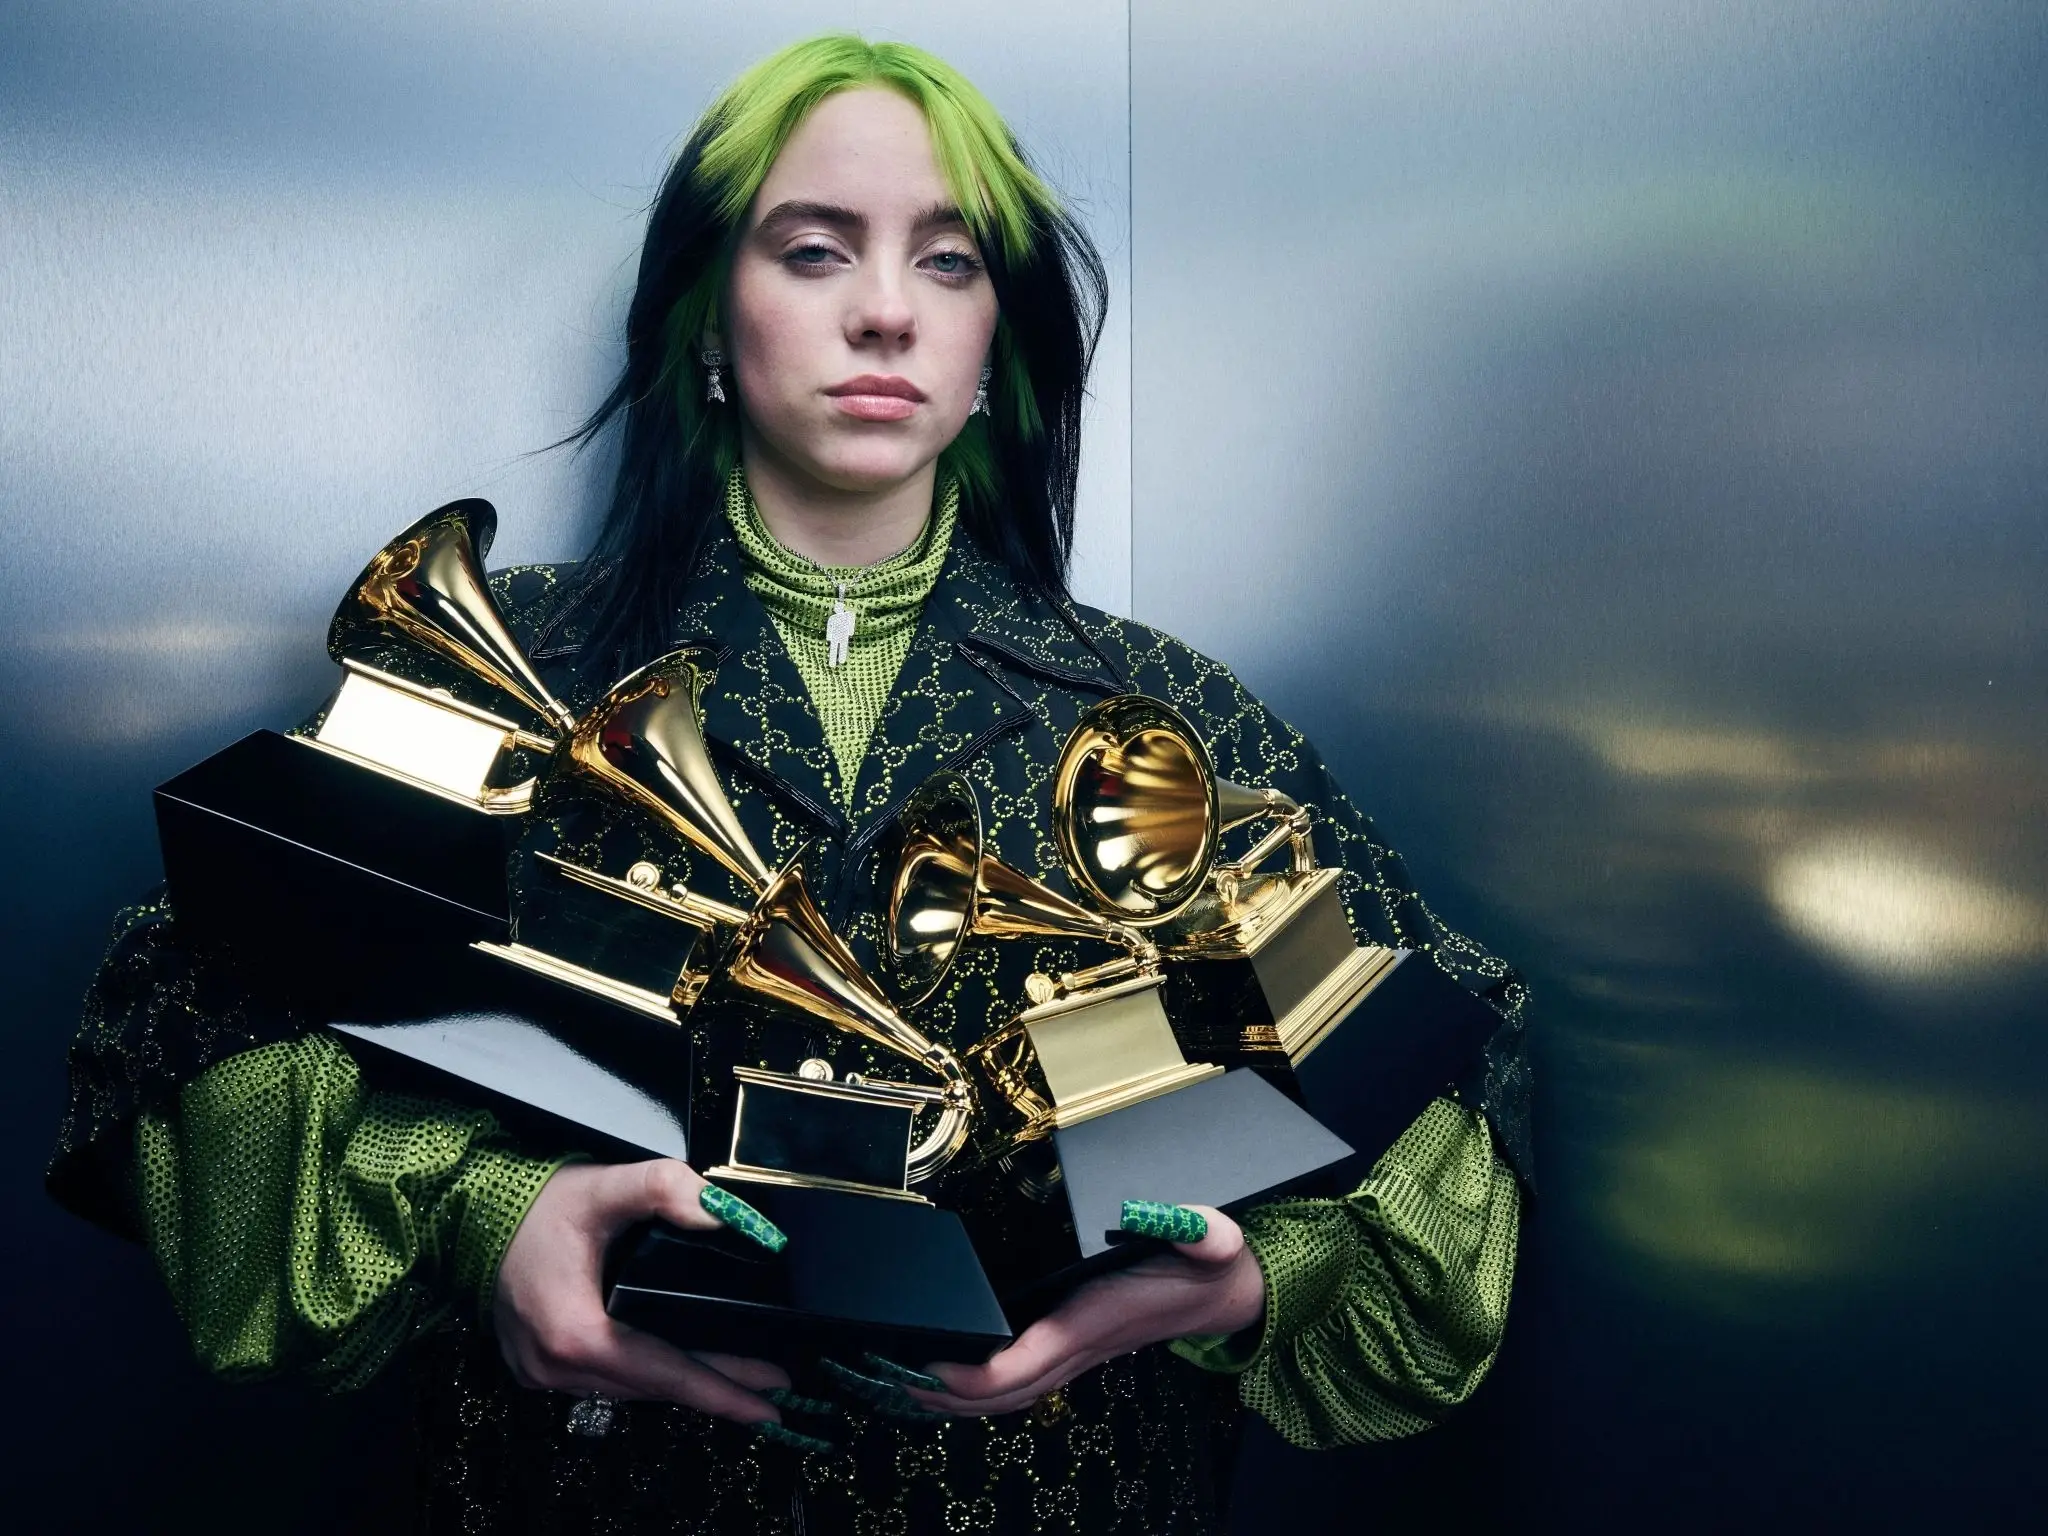 Billie Eilish's blue hair and outfit at the 2020 Grammy Awards - wide 5